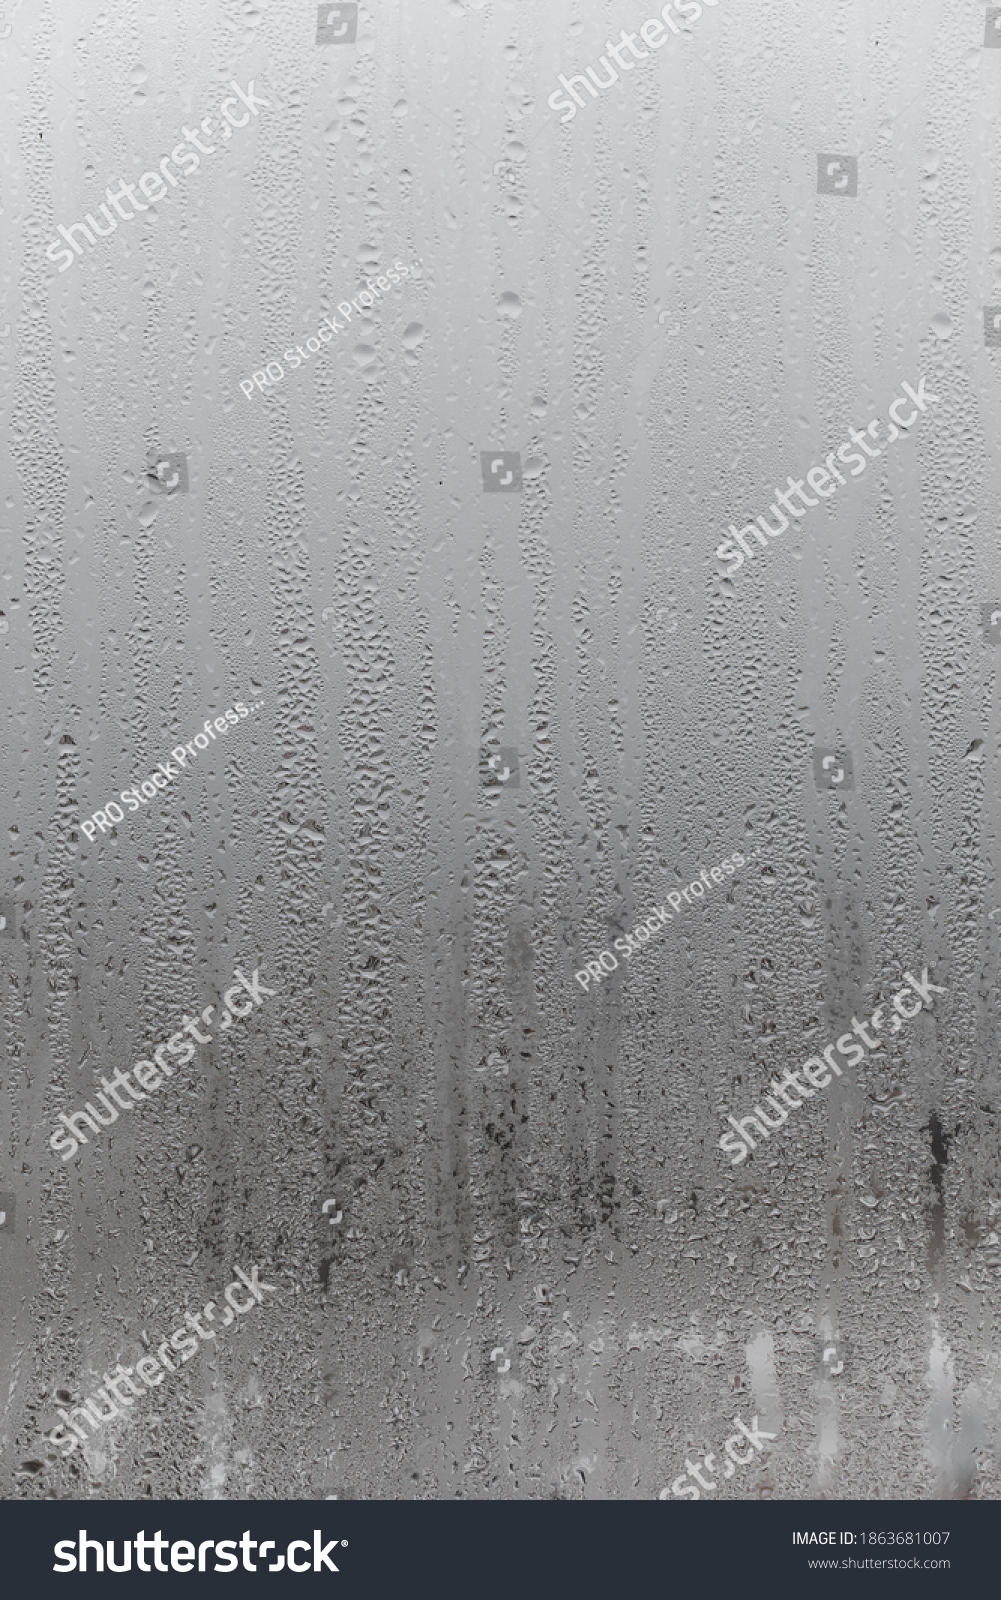 Dripping Condensation, Water Drops Background Rain drop Condensation Texture. Close up for misted glass with droplets of water draining down  #1863681007